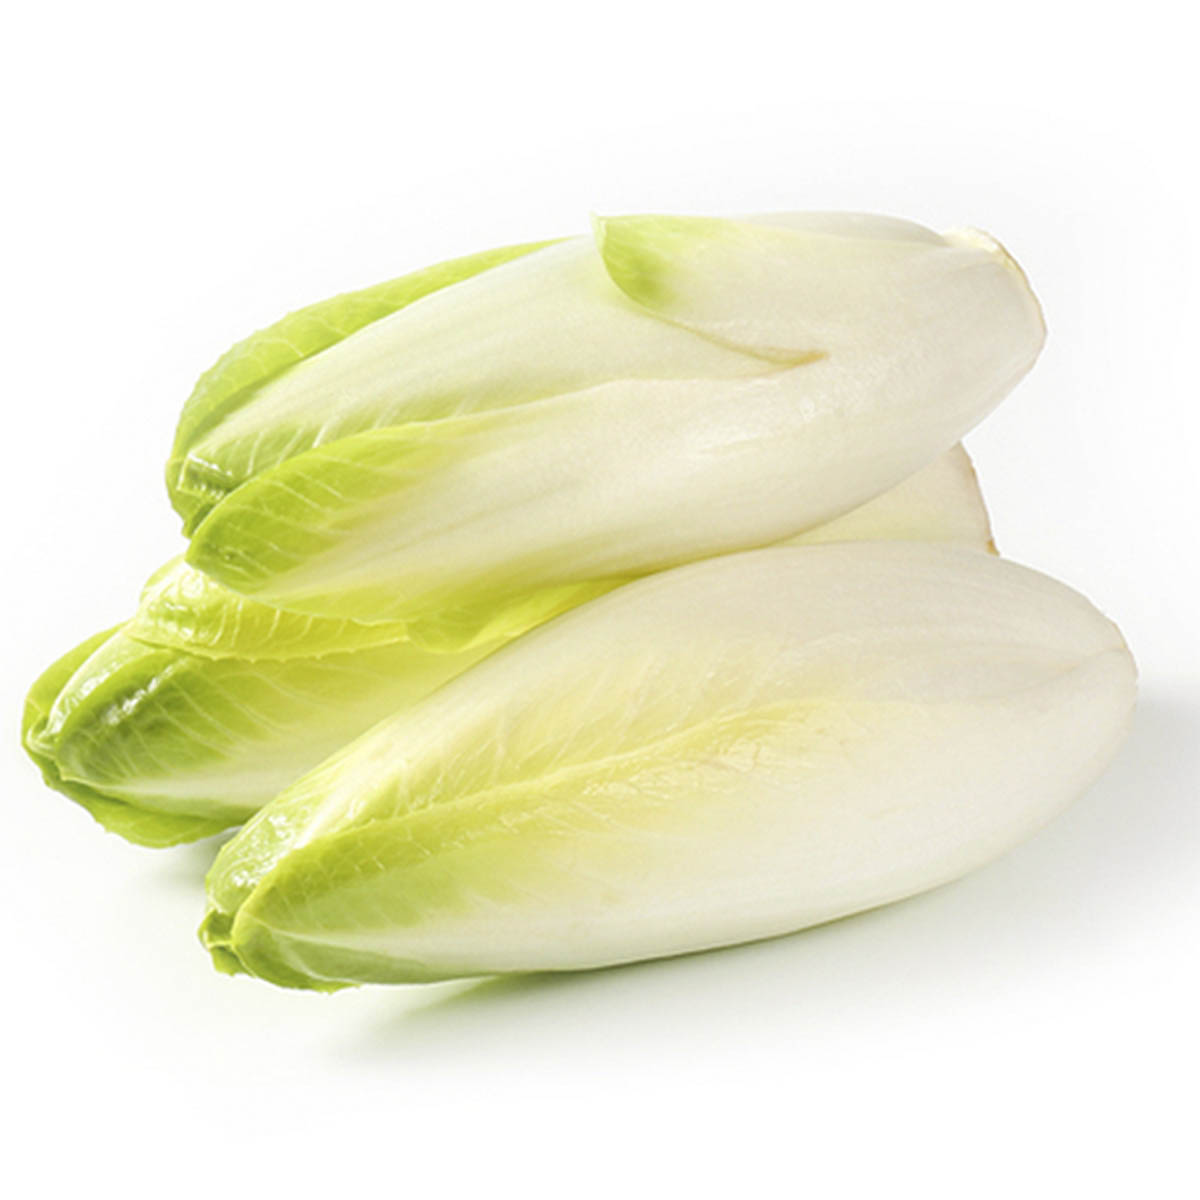 Three endive heads stacked.